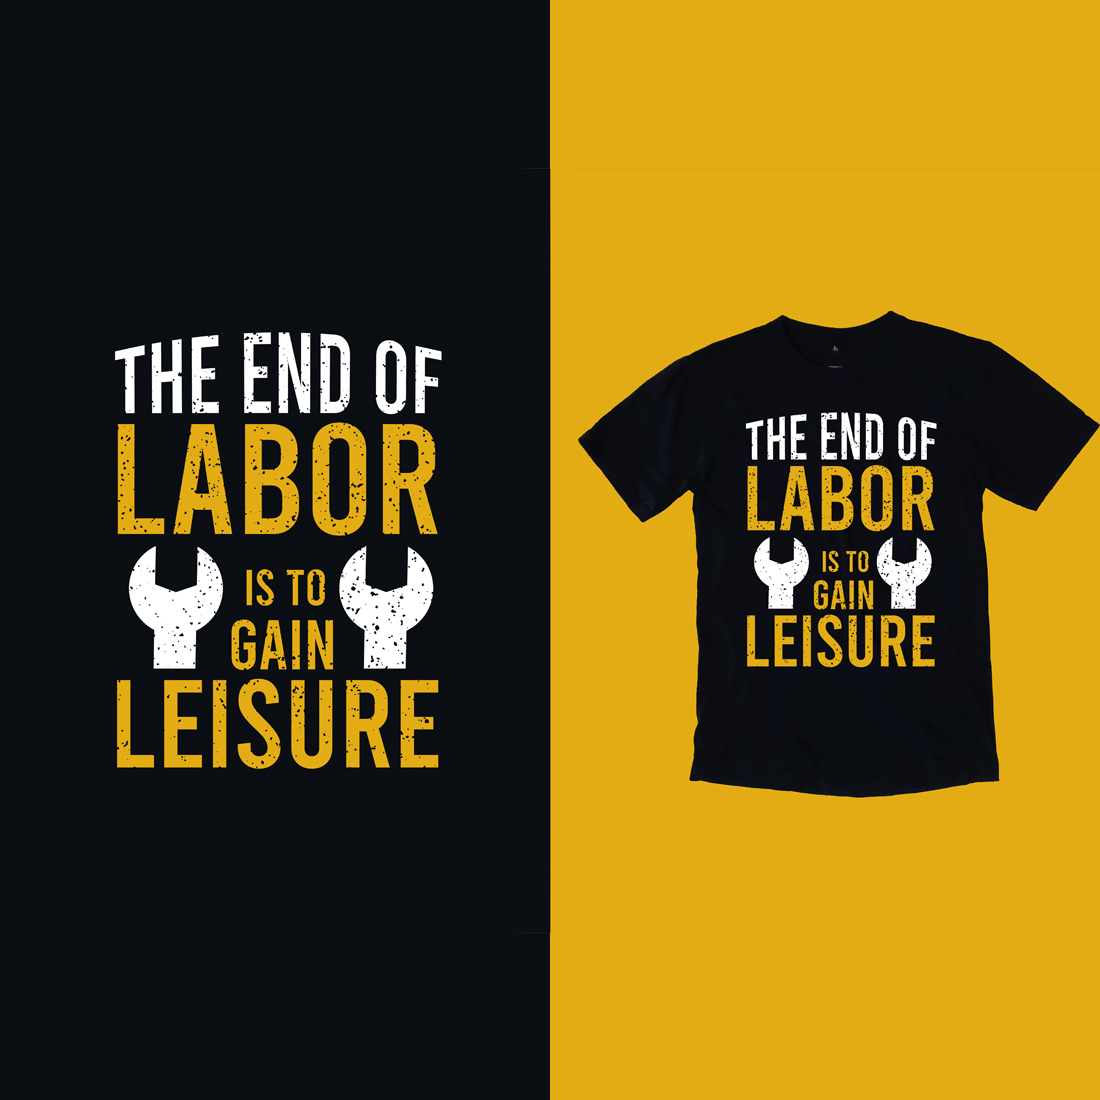 T - shirt that says the end of labor is to gain leisure.